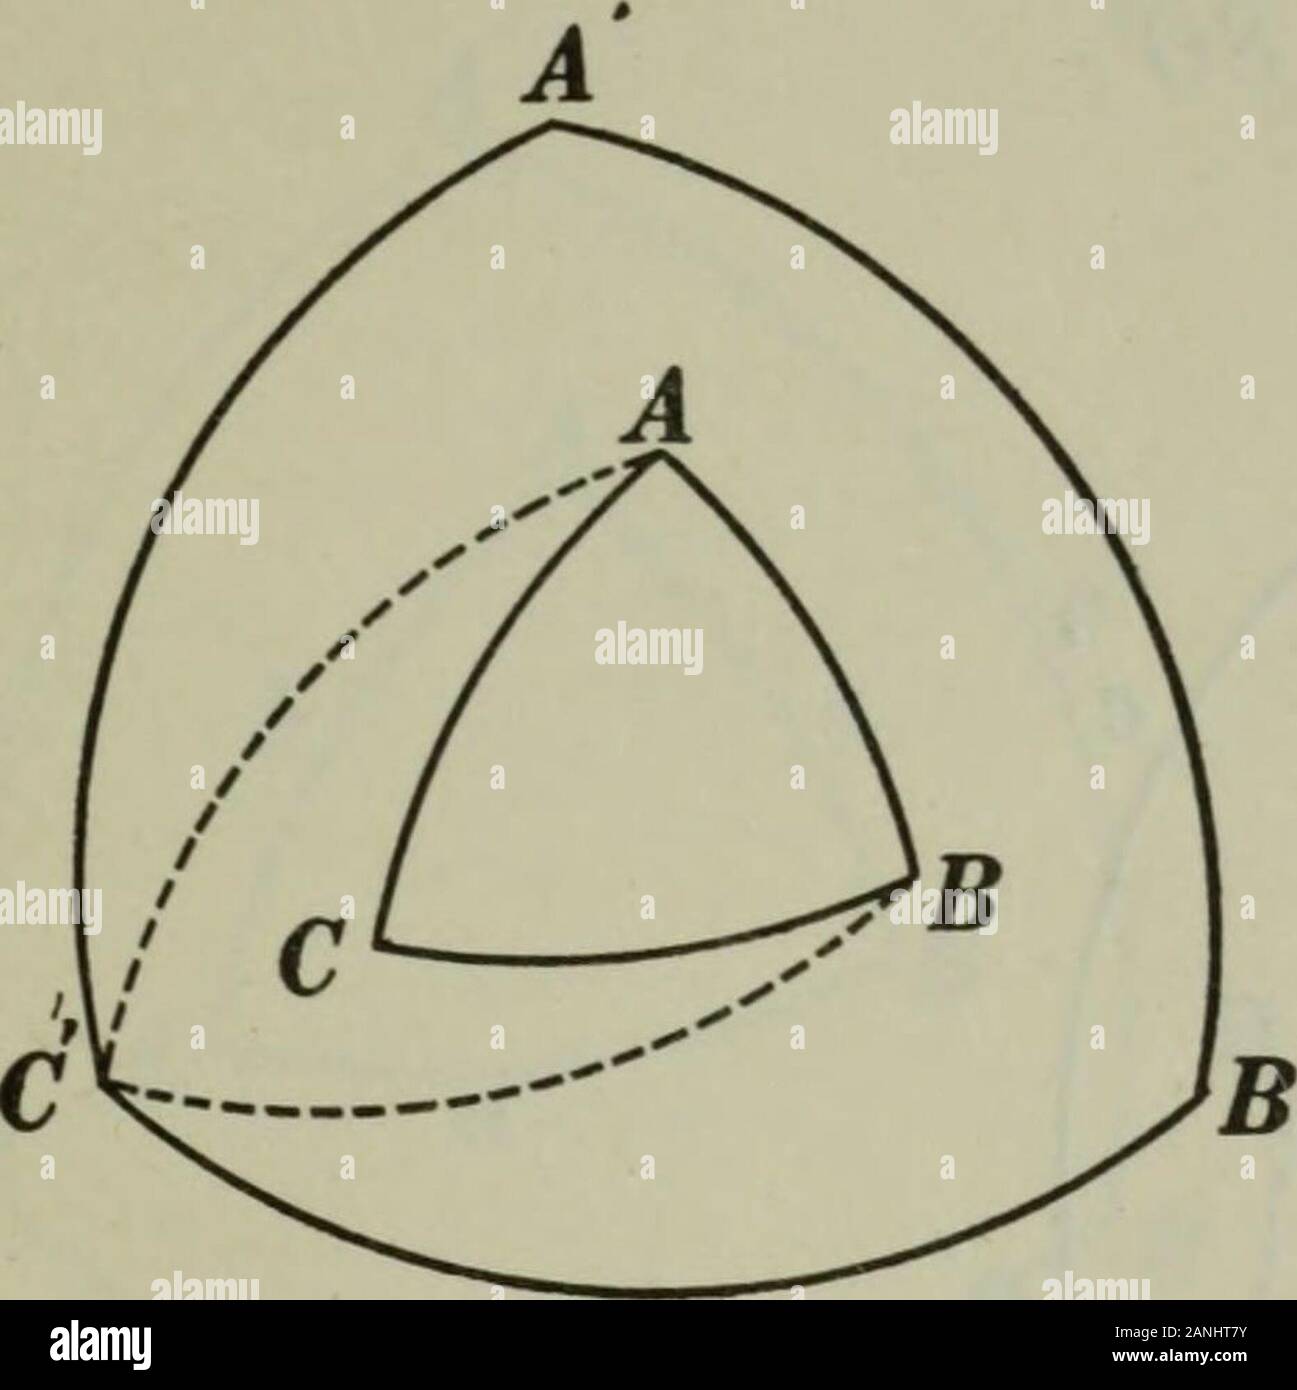 Plane And Solid Geometry Cai And Eab The Surface Of The Sphere Will Be Divided Intoeight Spherical Triangles Four Of Which Are Seen On The Hemi Sphere Represented In The Figure Of